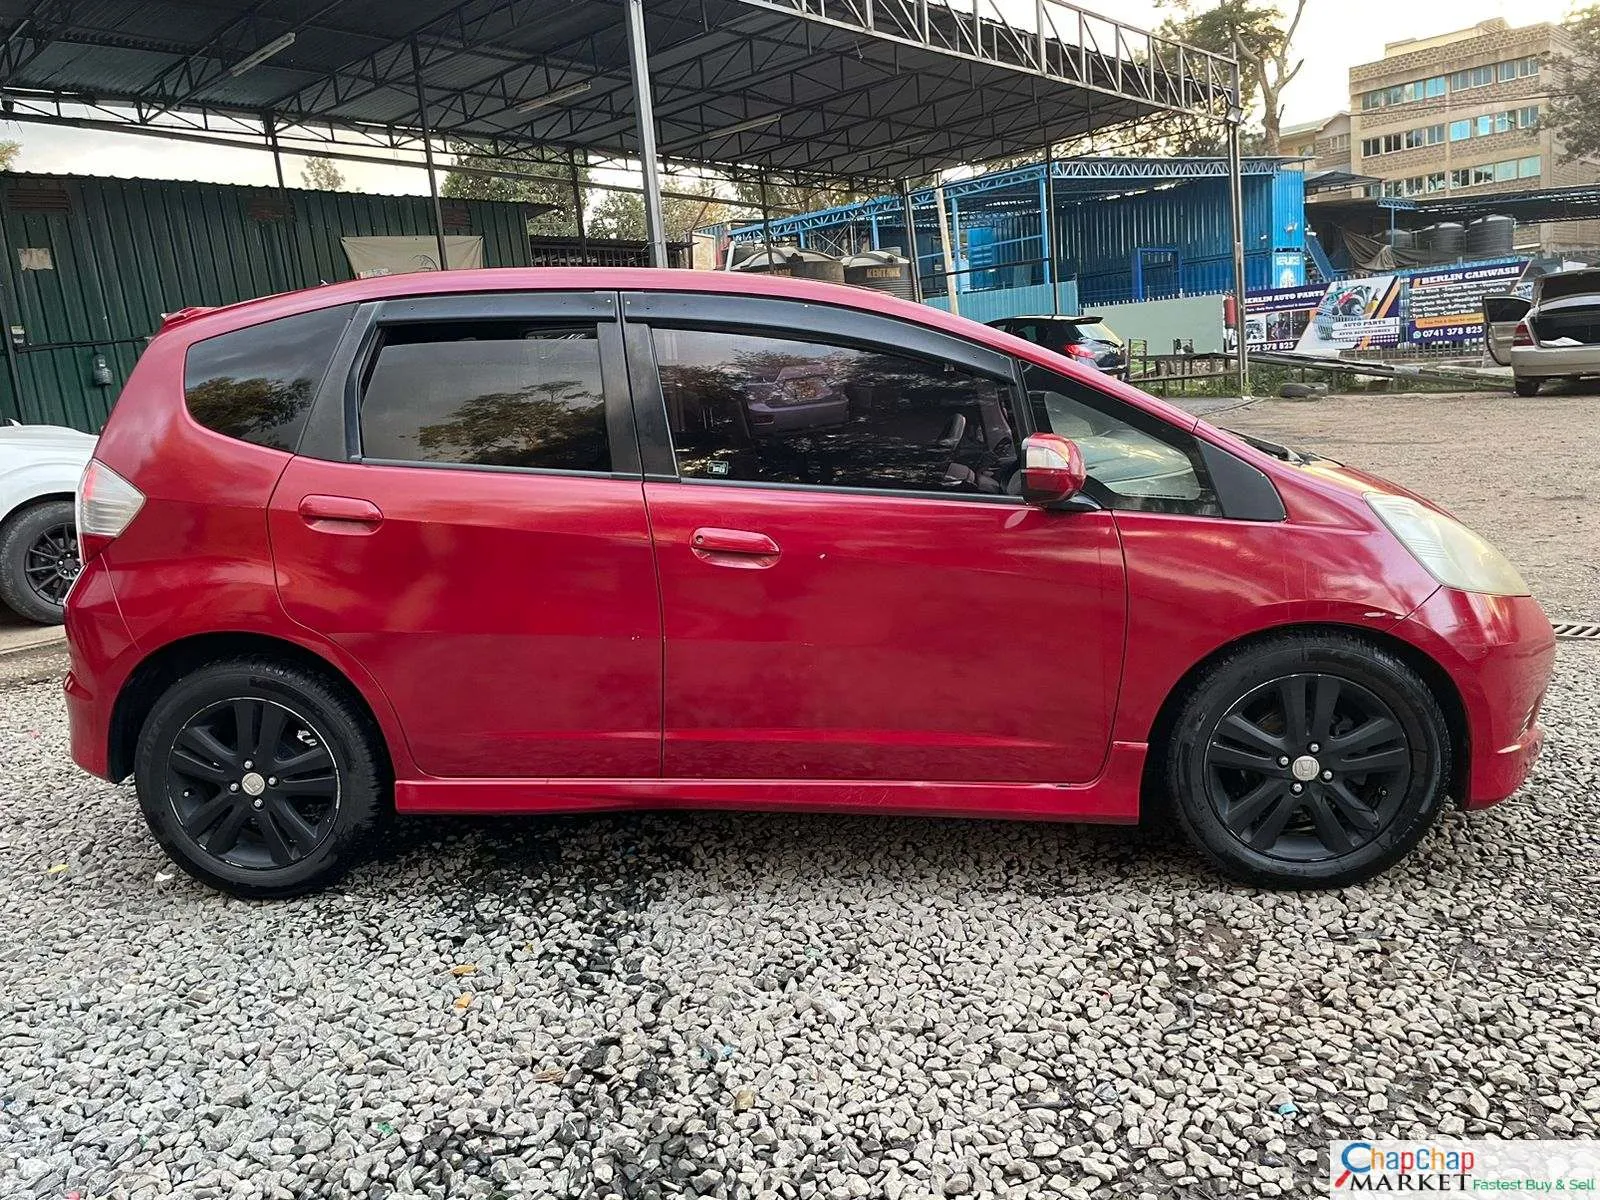 Honda fit RS 🔥 QUICK SALE You Pay 30% Deposit Trade in OK EXCLUSIVE